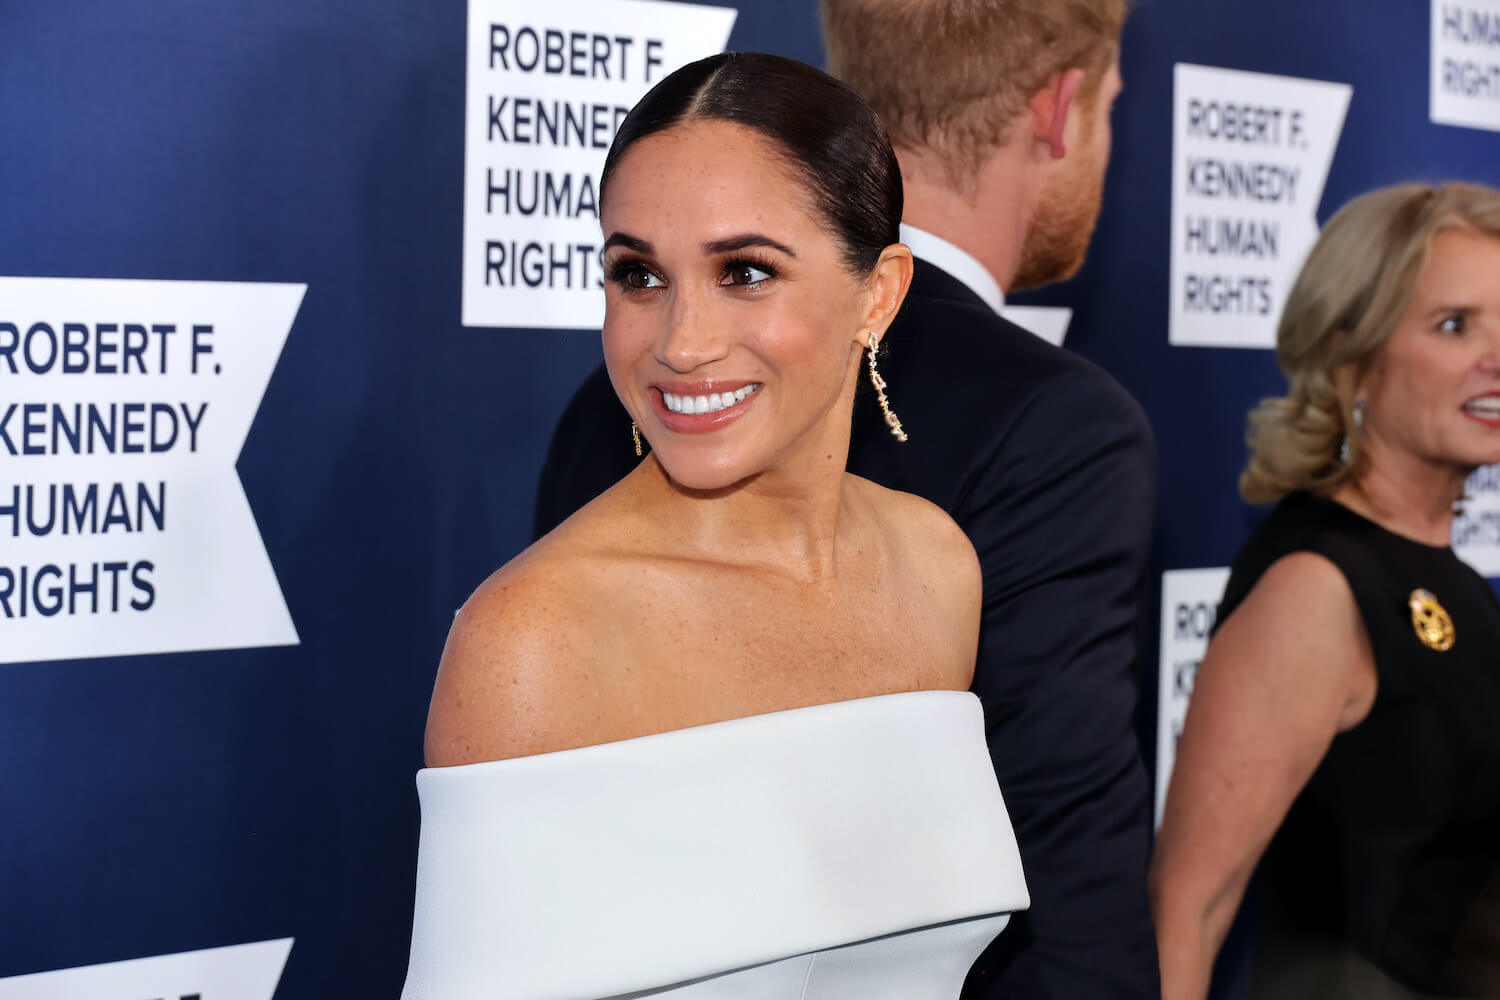 Meghan Markle turns and smiles for photographers while wearing a white off the shoulder dress